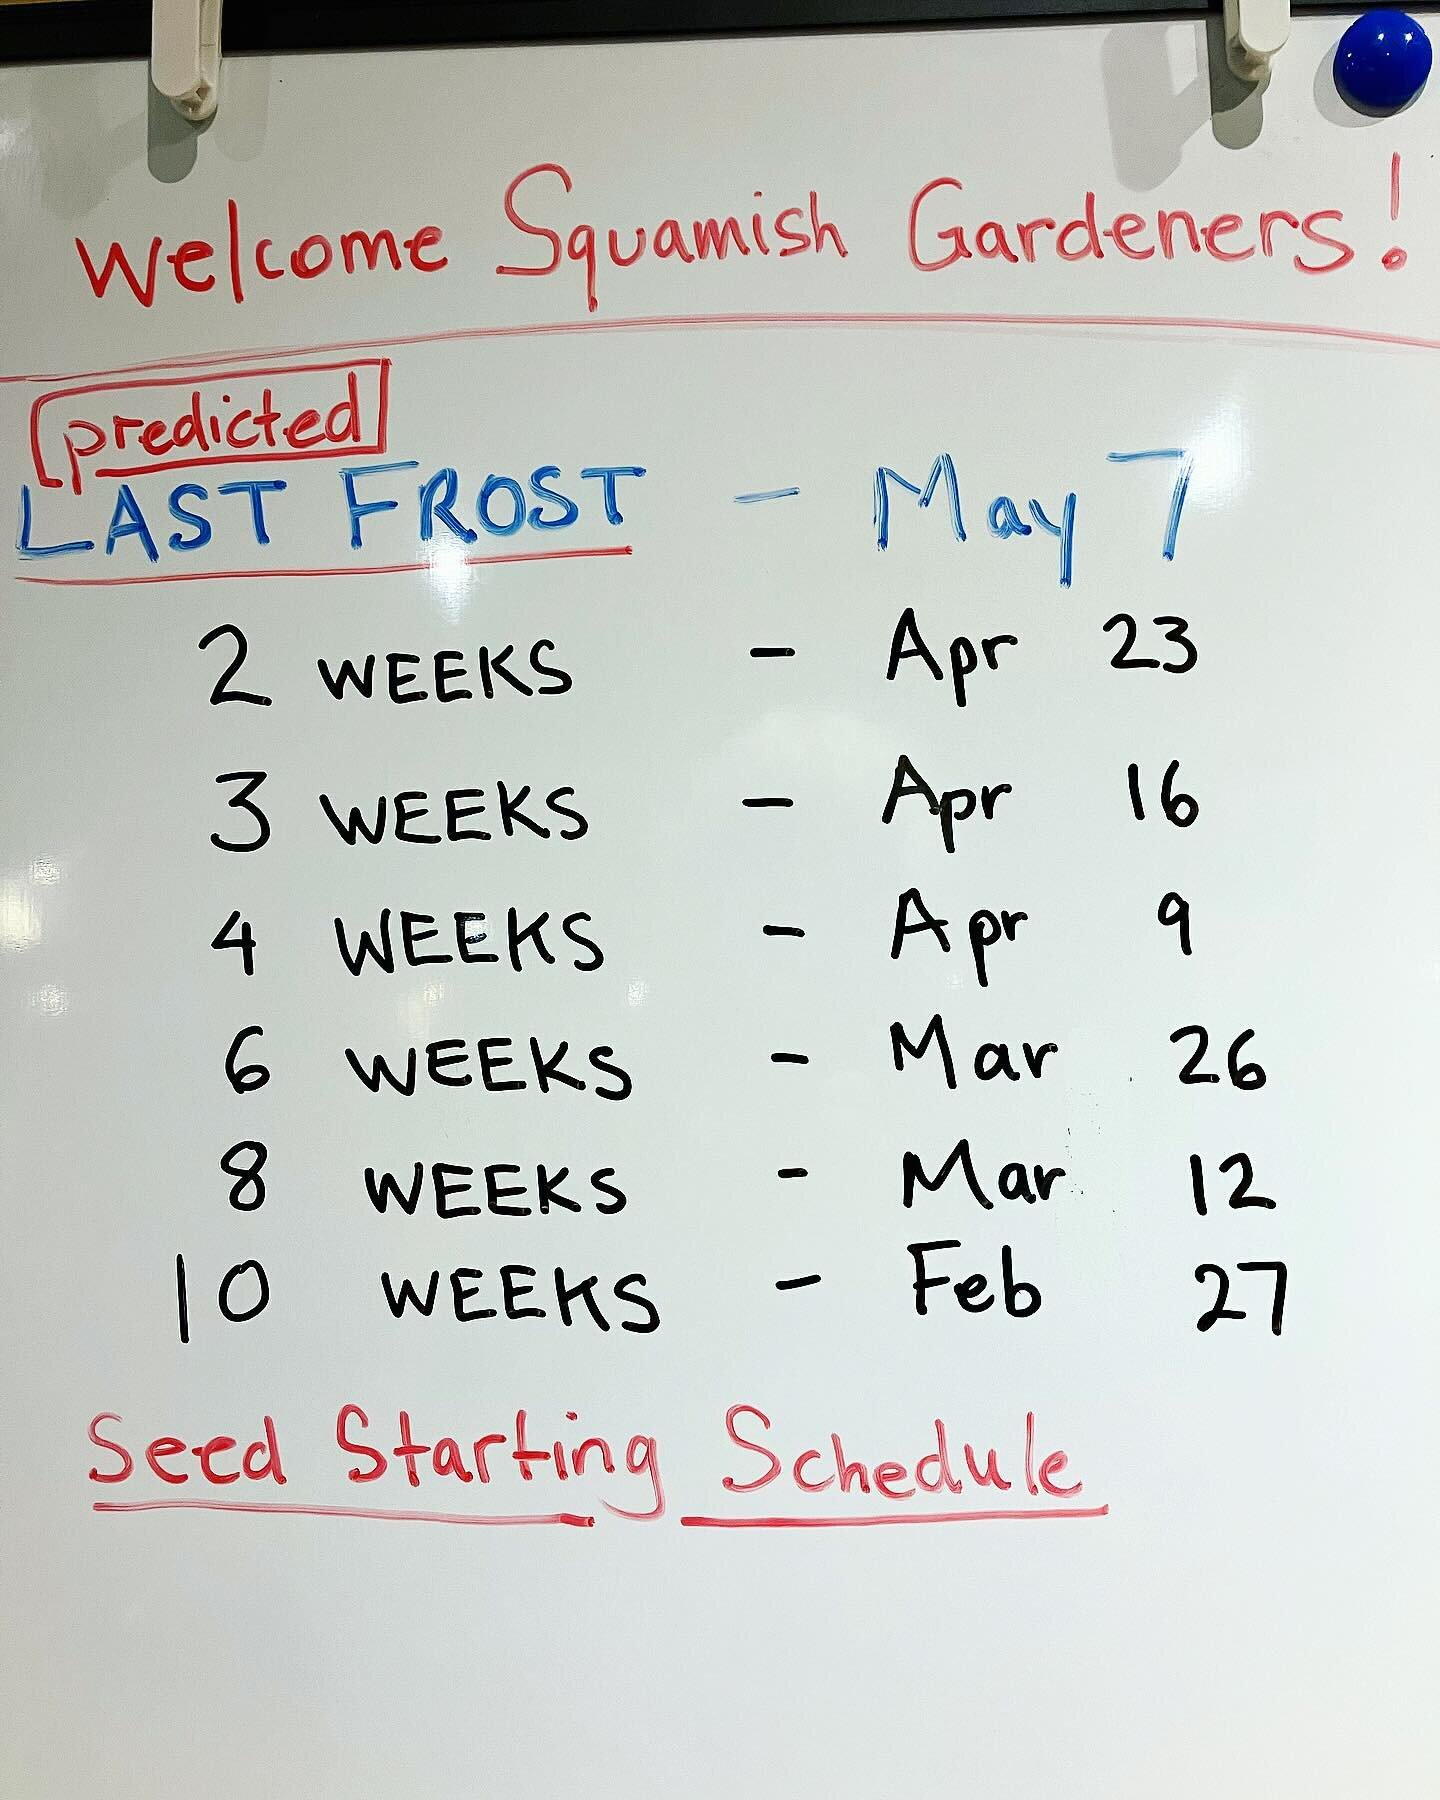 Goodbye winter, hello spring! We had a great #roundtable discussion at our latest #gardenclub meeting exchanging ideas and sharing #gardeningtips This handy chart was displayed to remind us it&rsquo;s #timetoplant ! #getplanting #seedstartingtime #ga